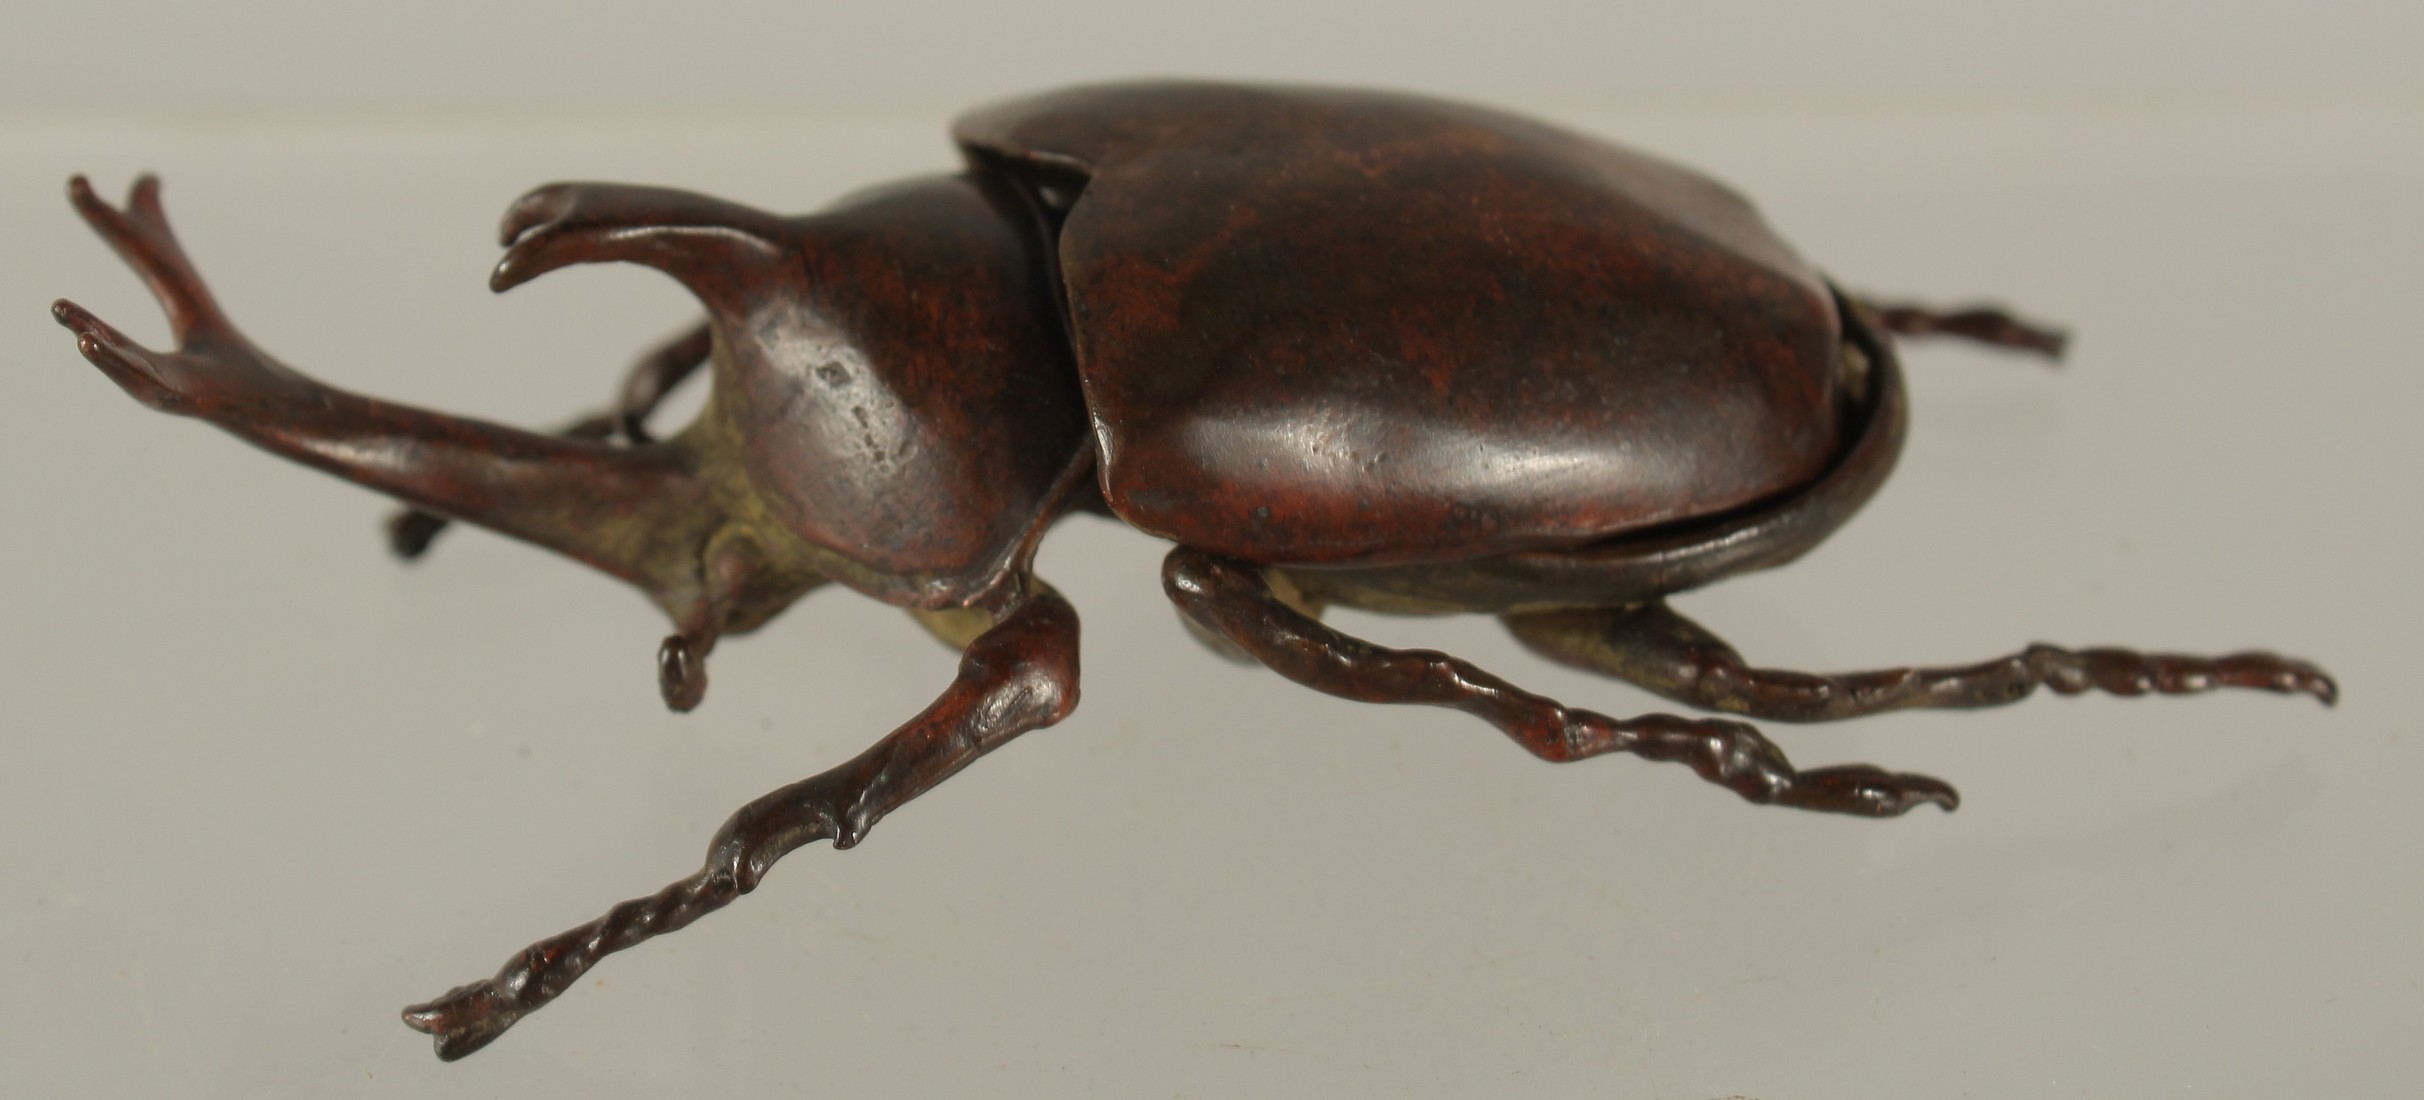 A BRONZE OKIMONO OF A RHINO BEETLE, with removable wings, 9cm long.